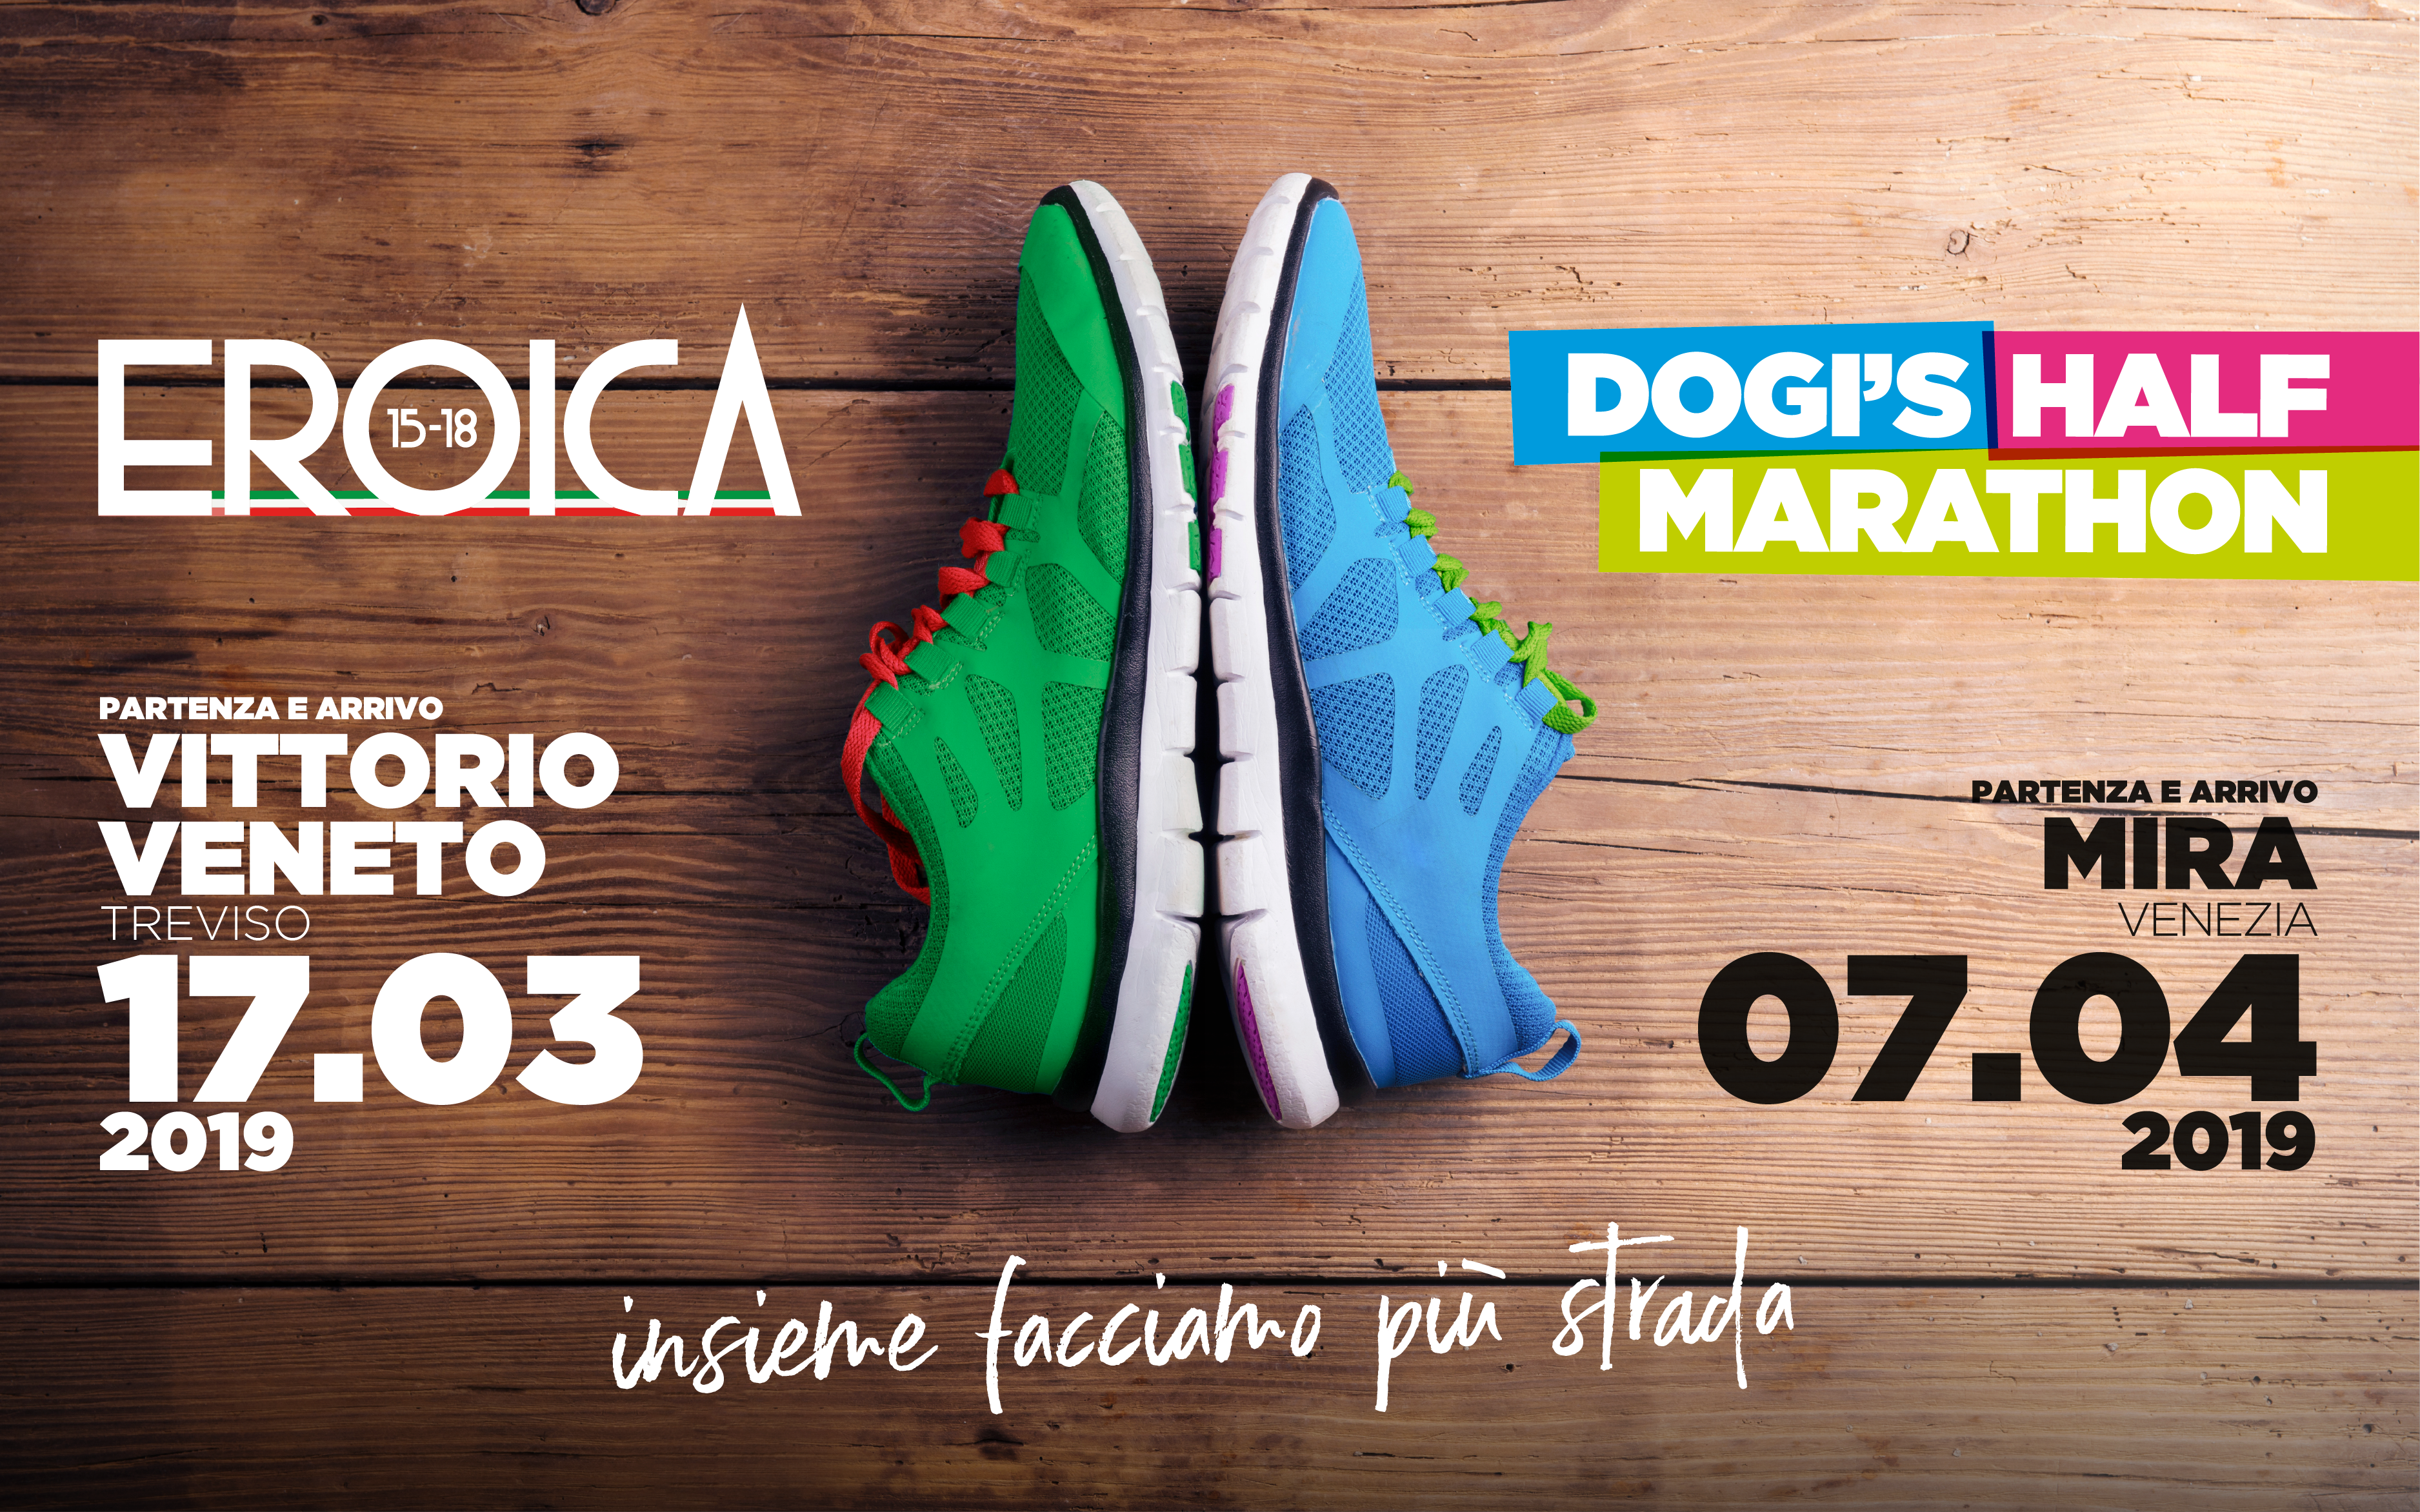 Dogis_Eroica